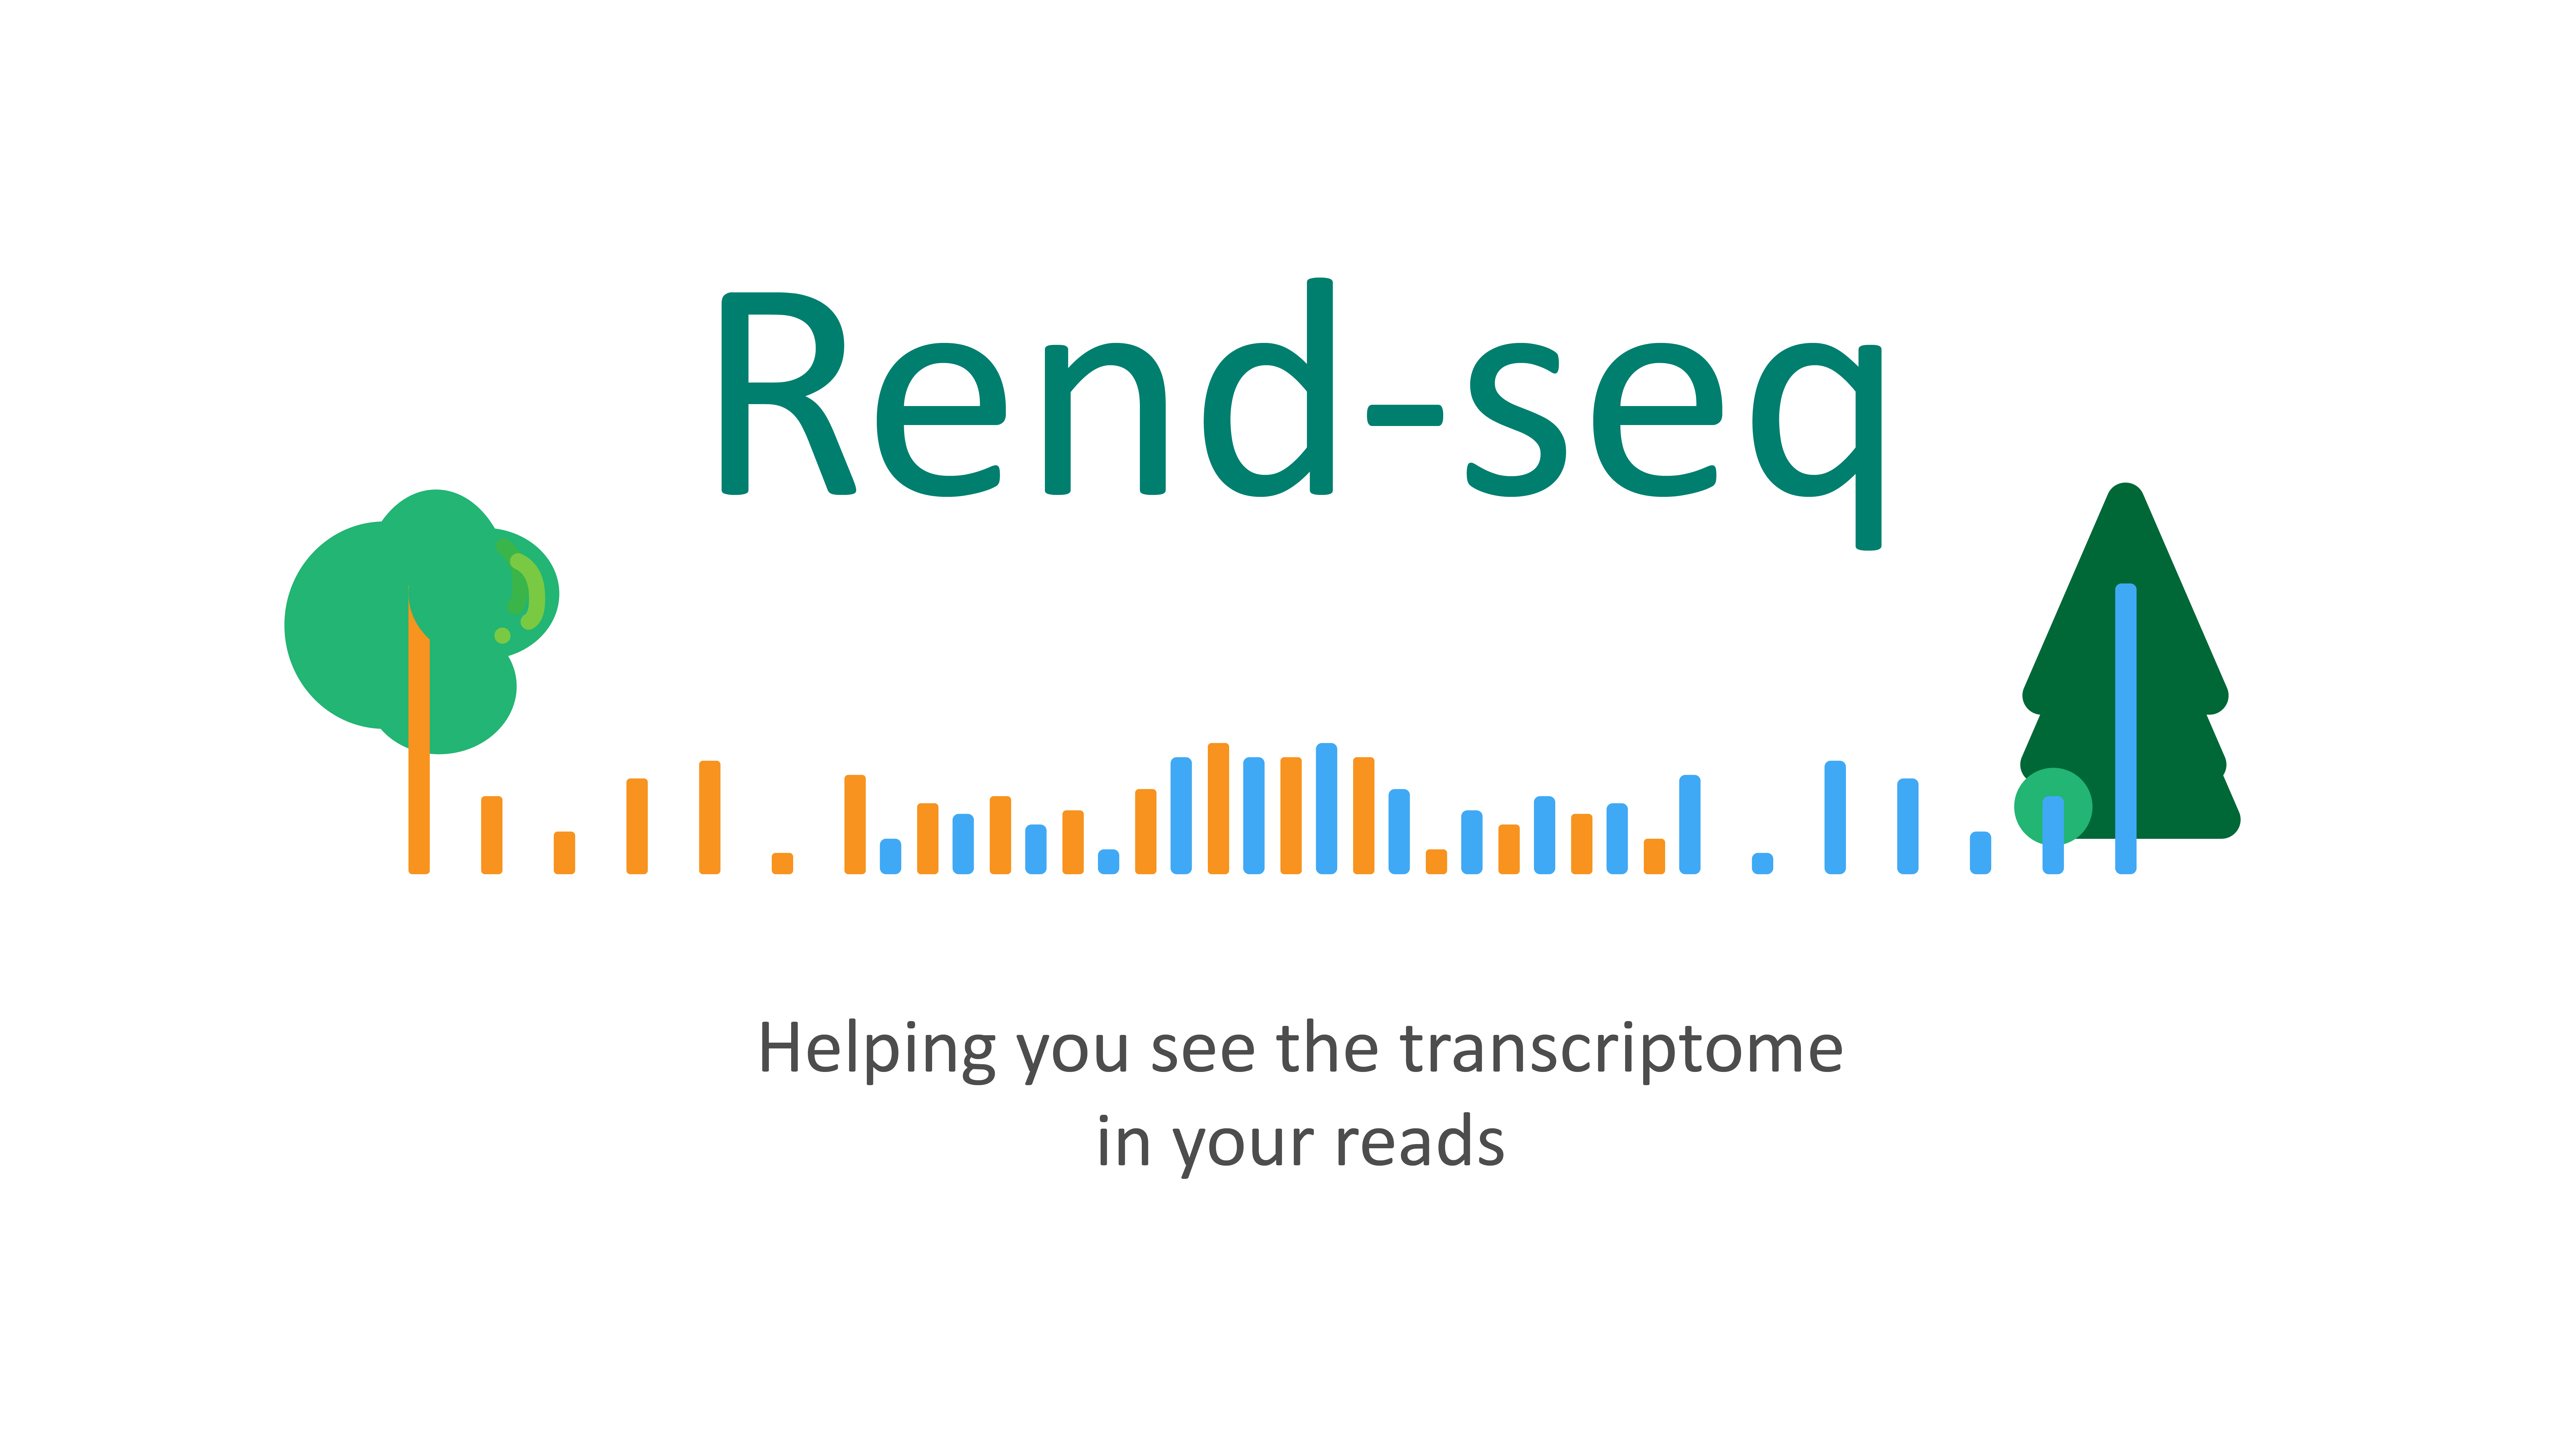 Welcome to rendseq!